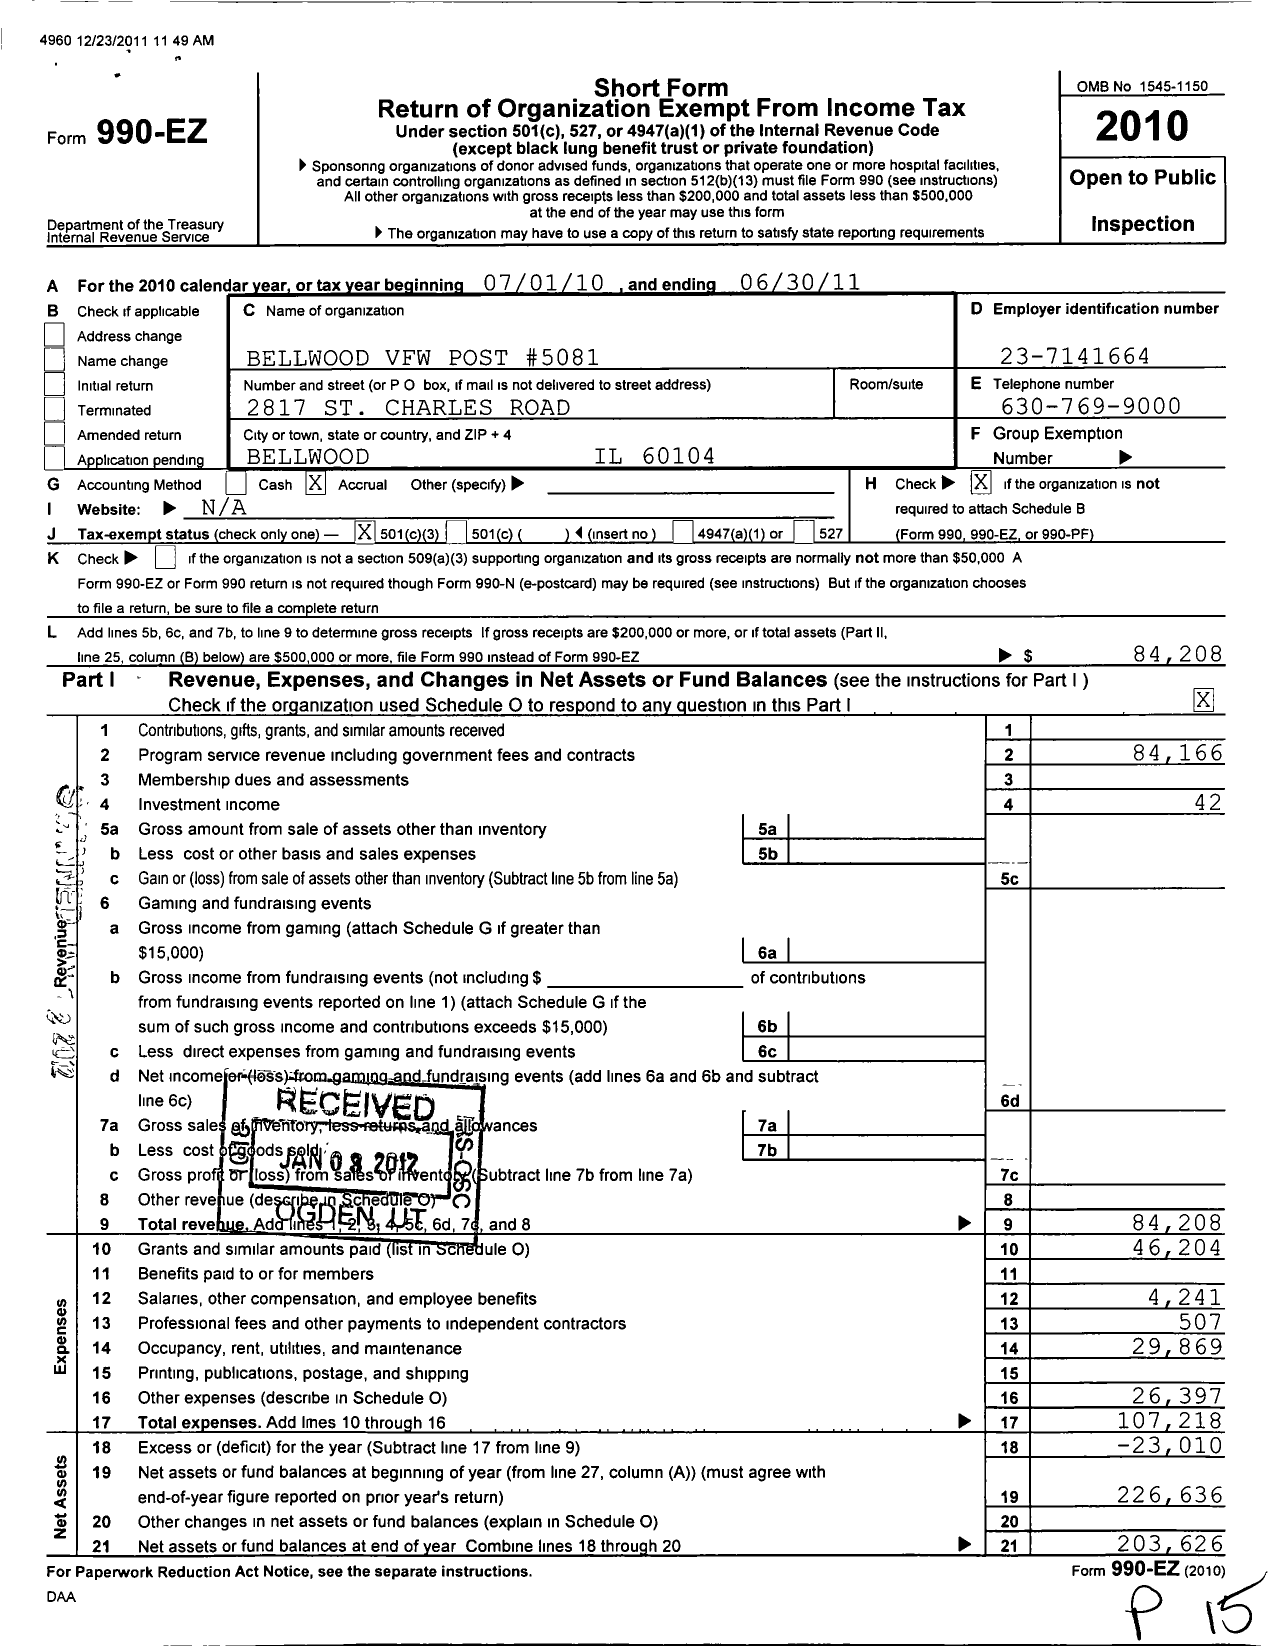 Image of first page of 2010 Form 990EZ for Bellwood Memorial Post No 5081 Veterans of Foreign Wars of the Us